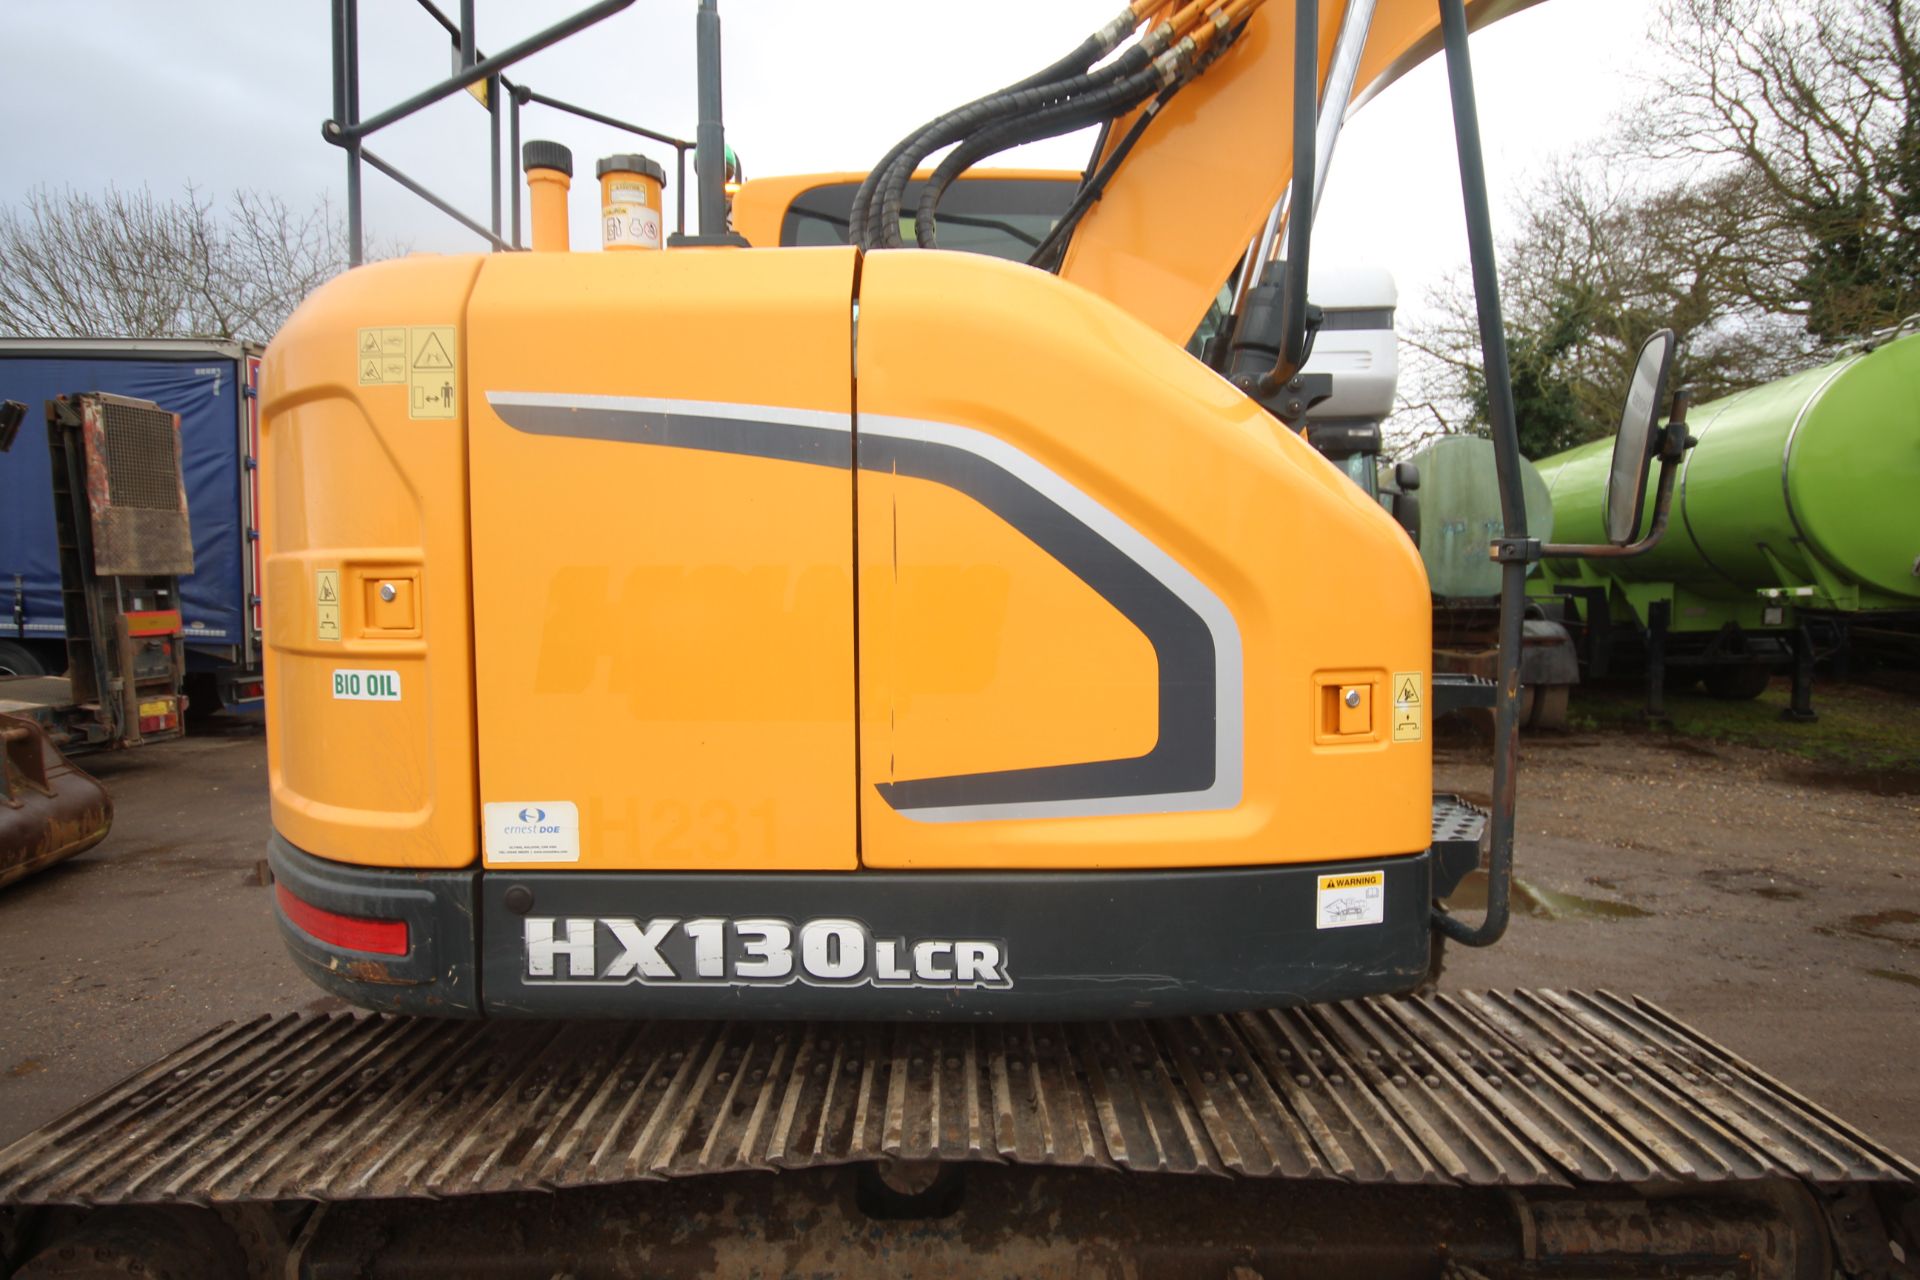 **CATALOGUE CHNAGE** Hyundai HX130 LCR 13T steel track excavator. 2018. c. 5,150 hours. Serial - Image 31 of 77